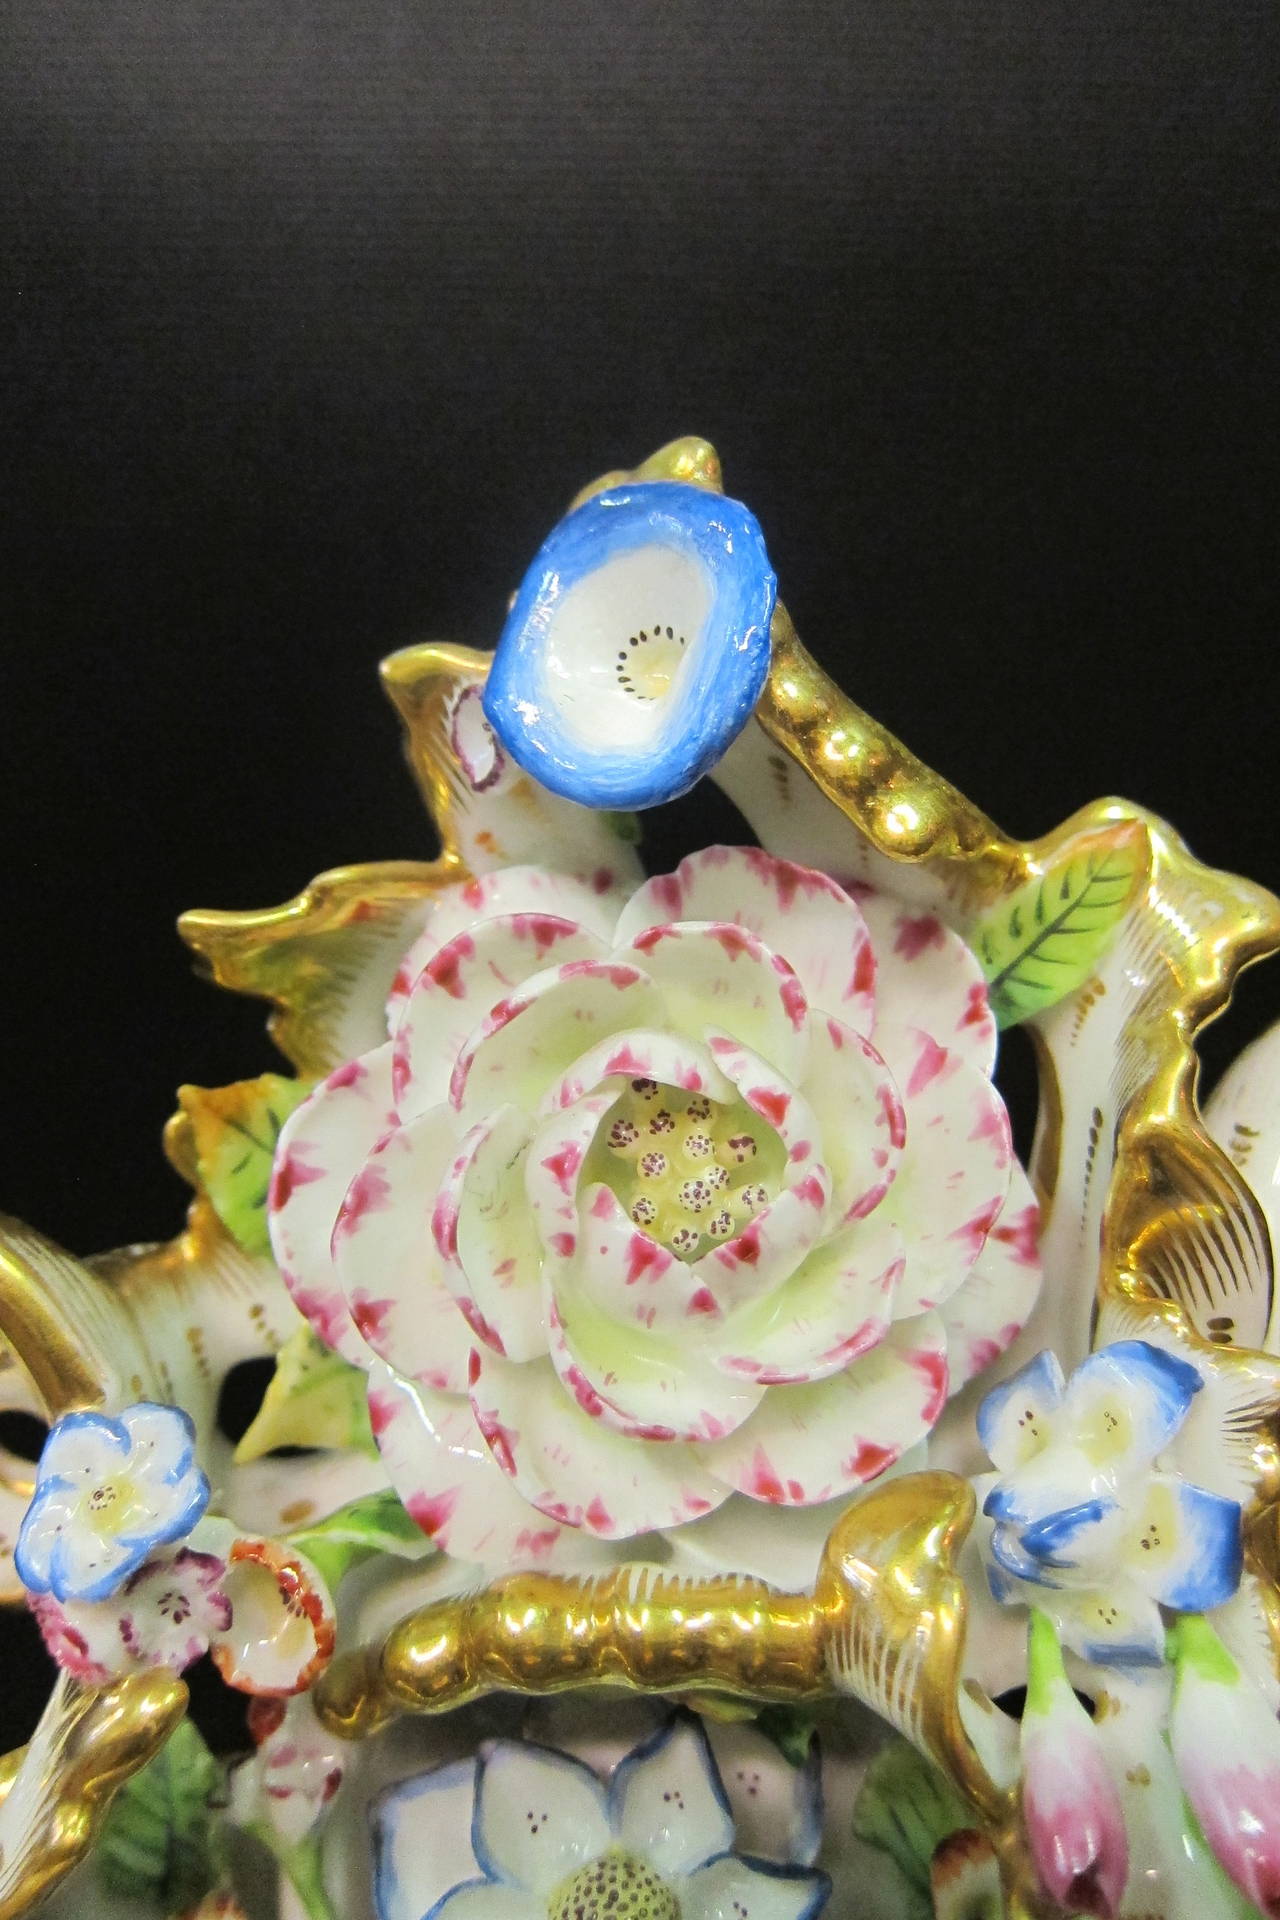 This exceptional Paris Porcelain clock with it's original fitted matching plinth is a rare find. Circa mid 1800's, this elaborately designed mantle clock is detailed with hand applied & hand colored floral accents that nestle within the spiraling